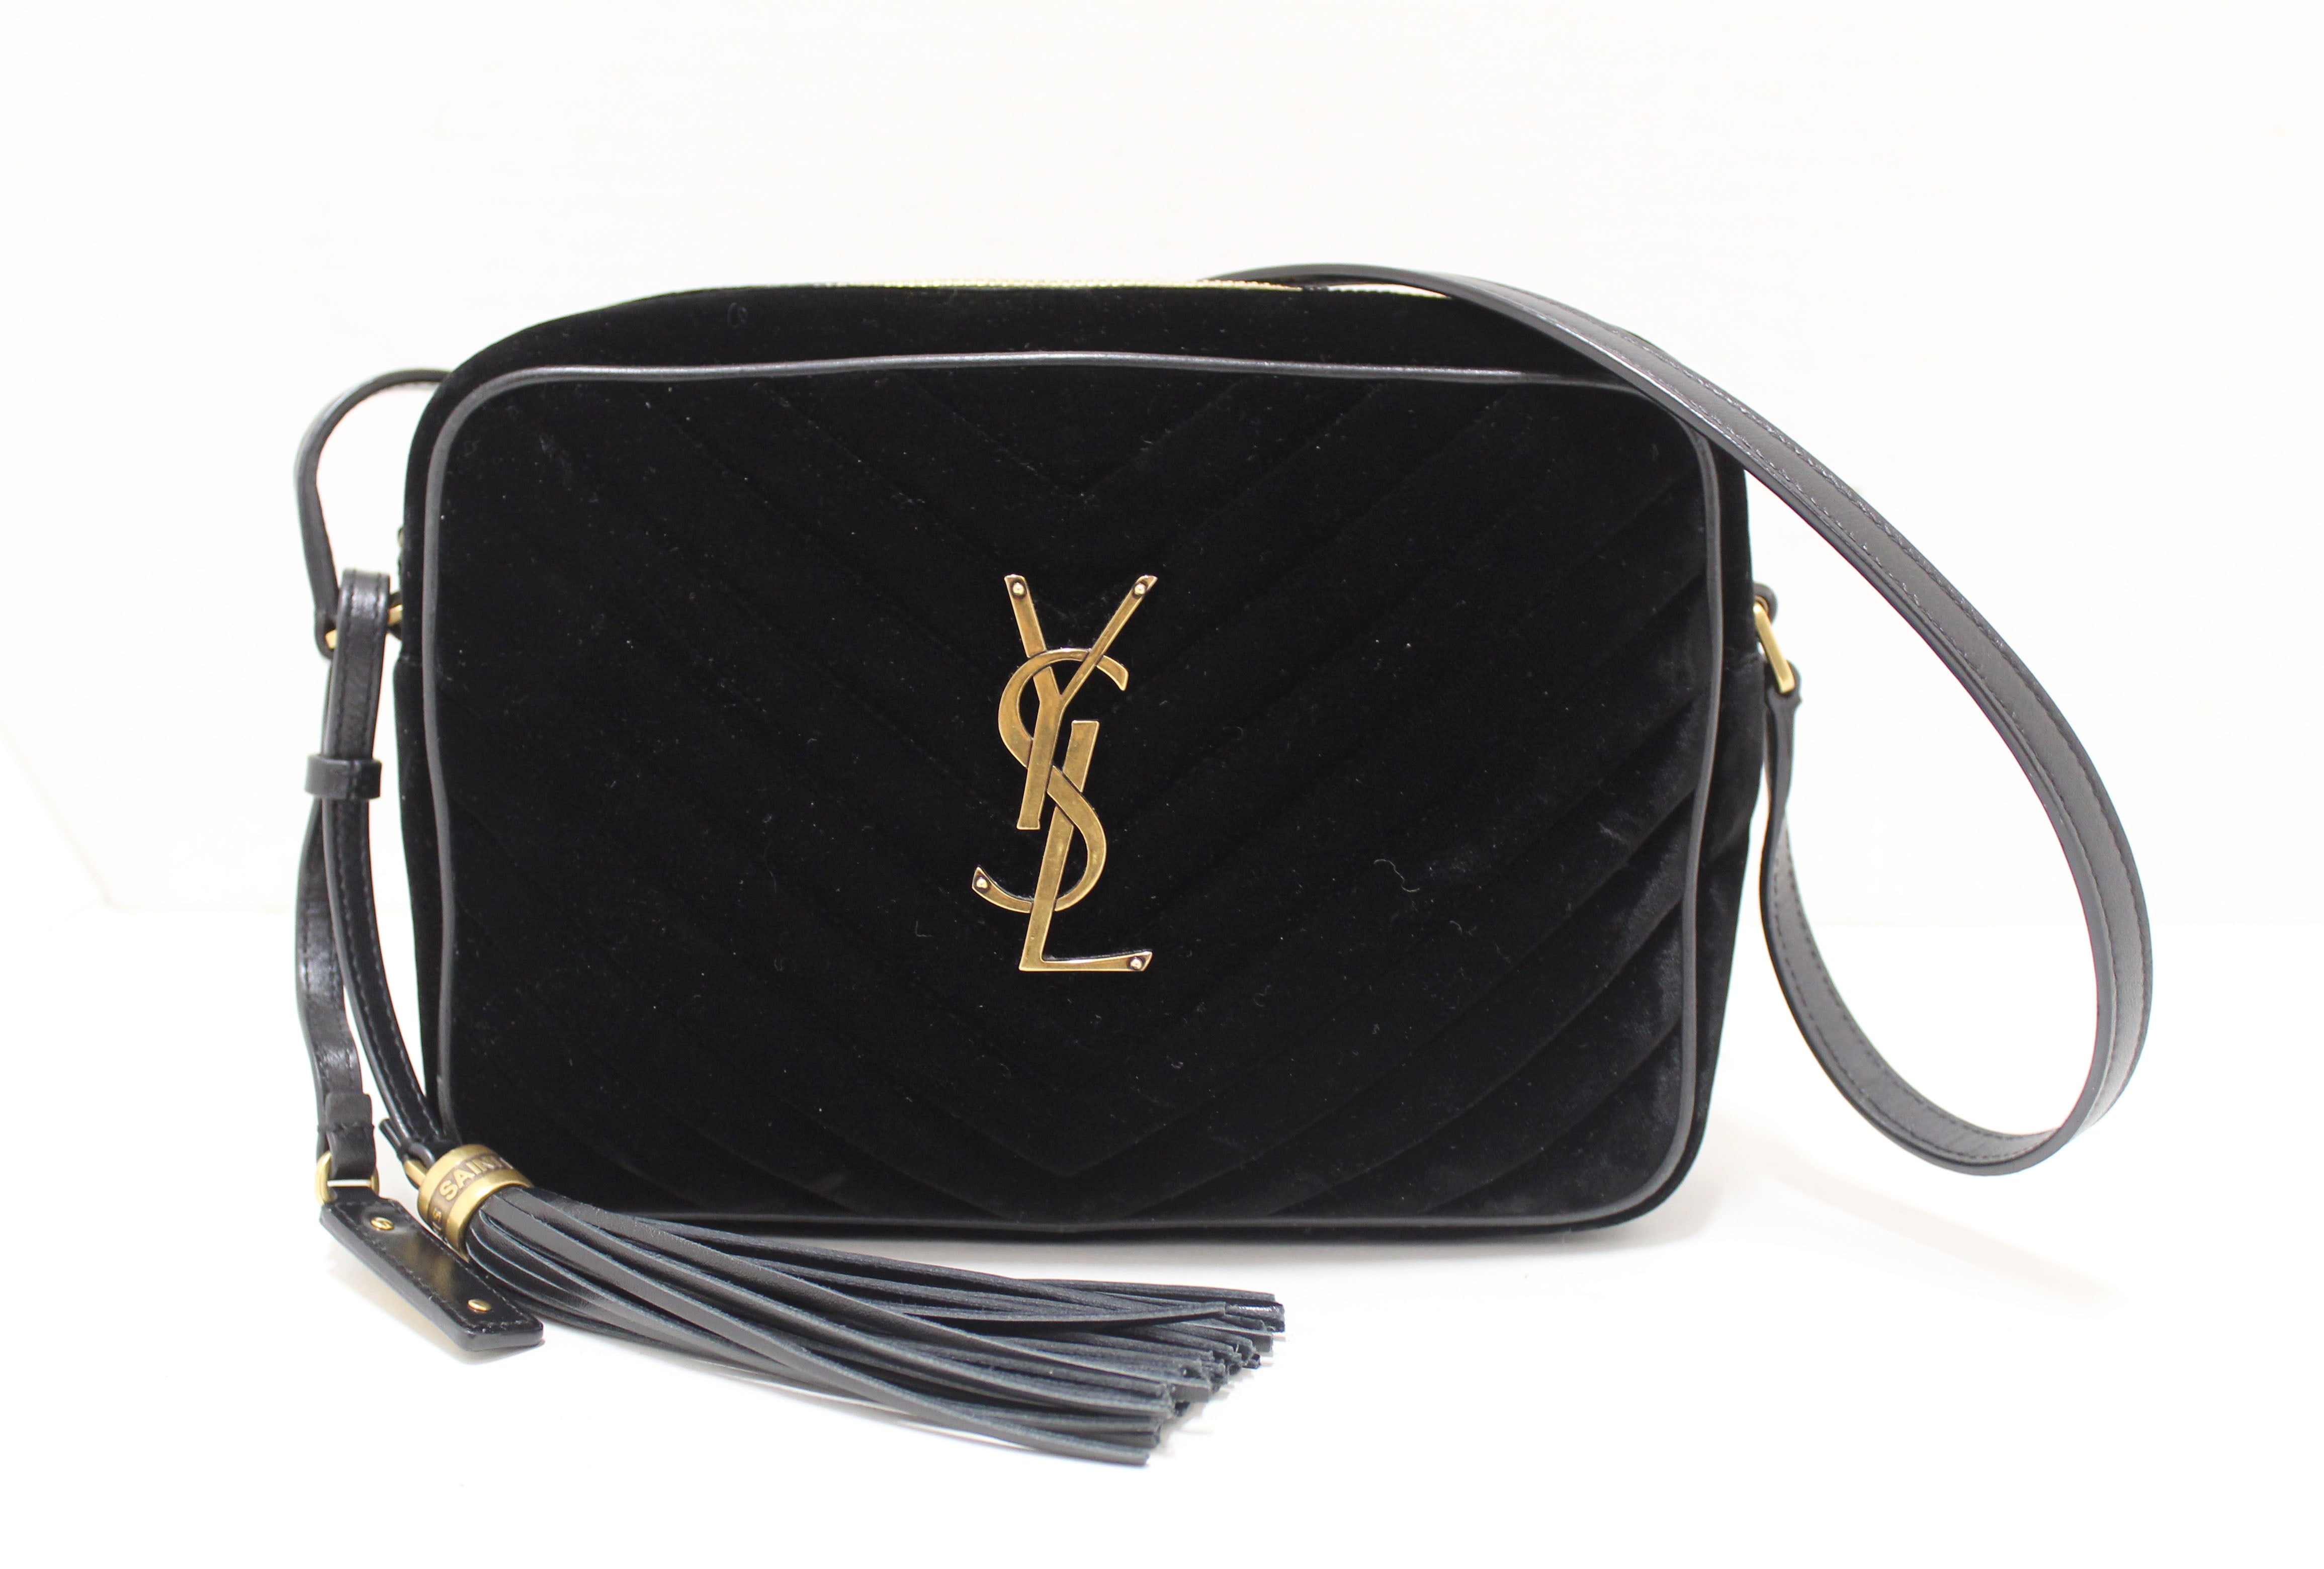 Authentic NEW YSL Saint Laurent Lou Camera Bag Black Quilted Leather